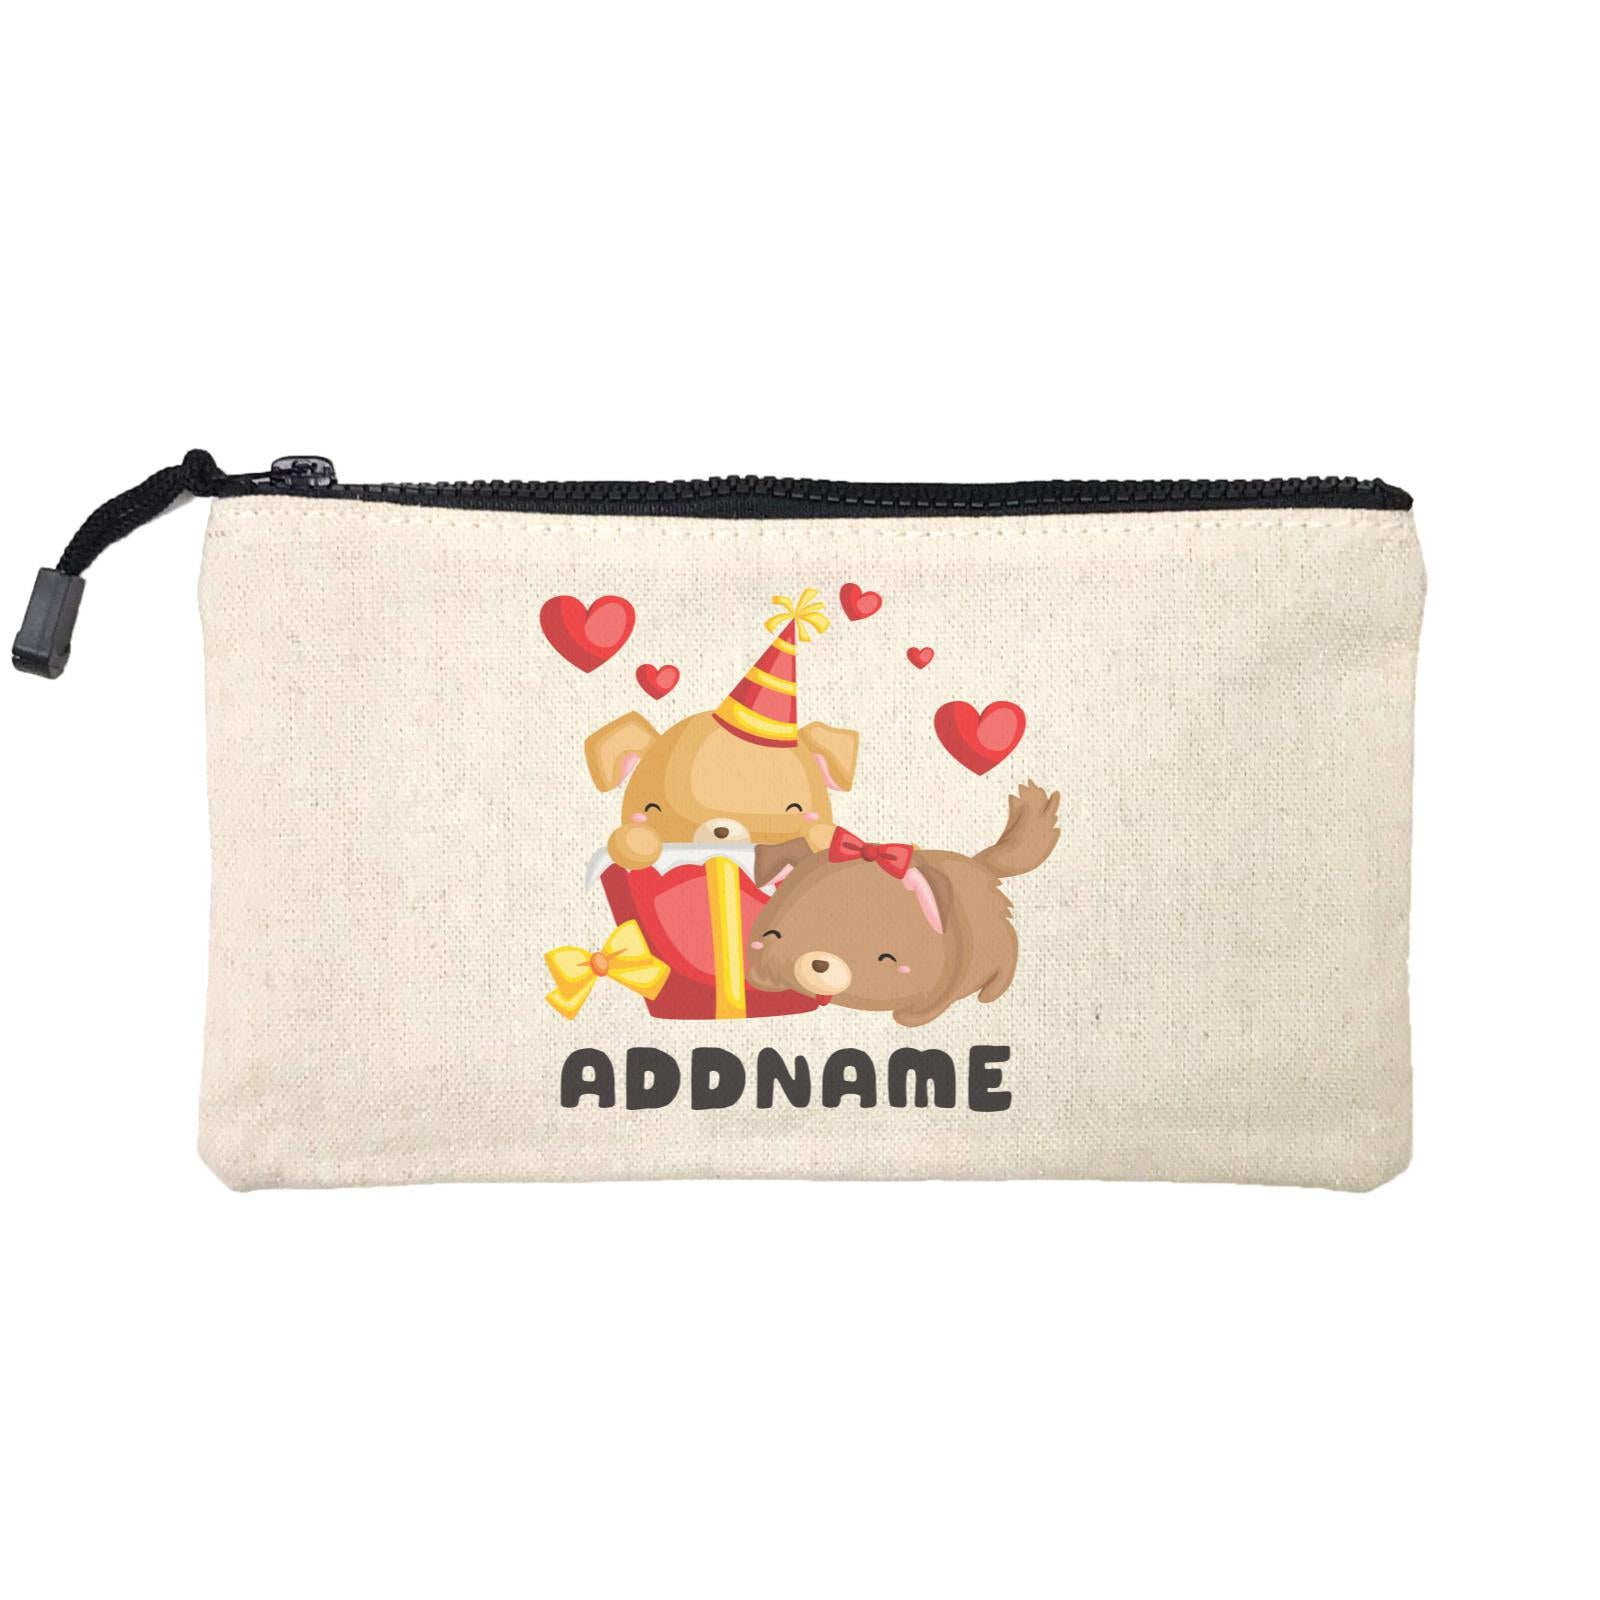 Birthday Friendly Animals Happy Two Dogs Open Present Addname Mini Accessories Stationery Pouch